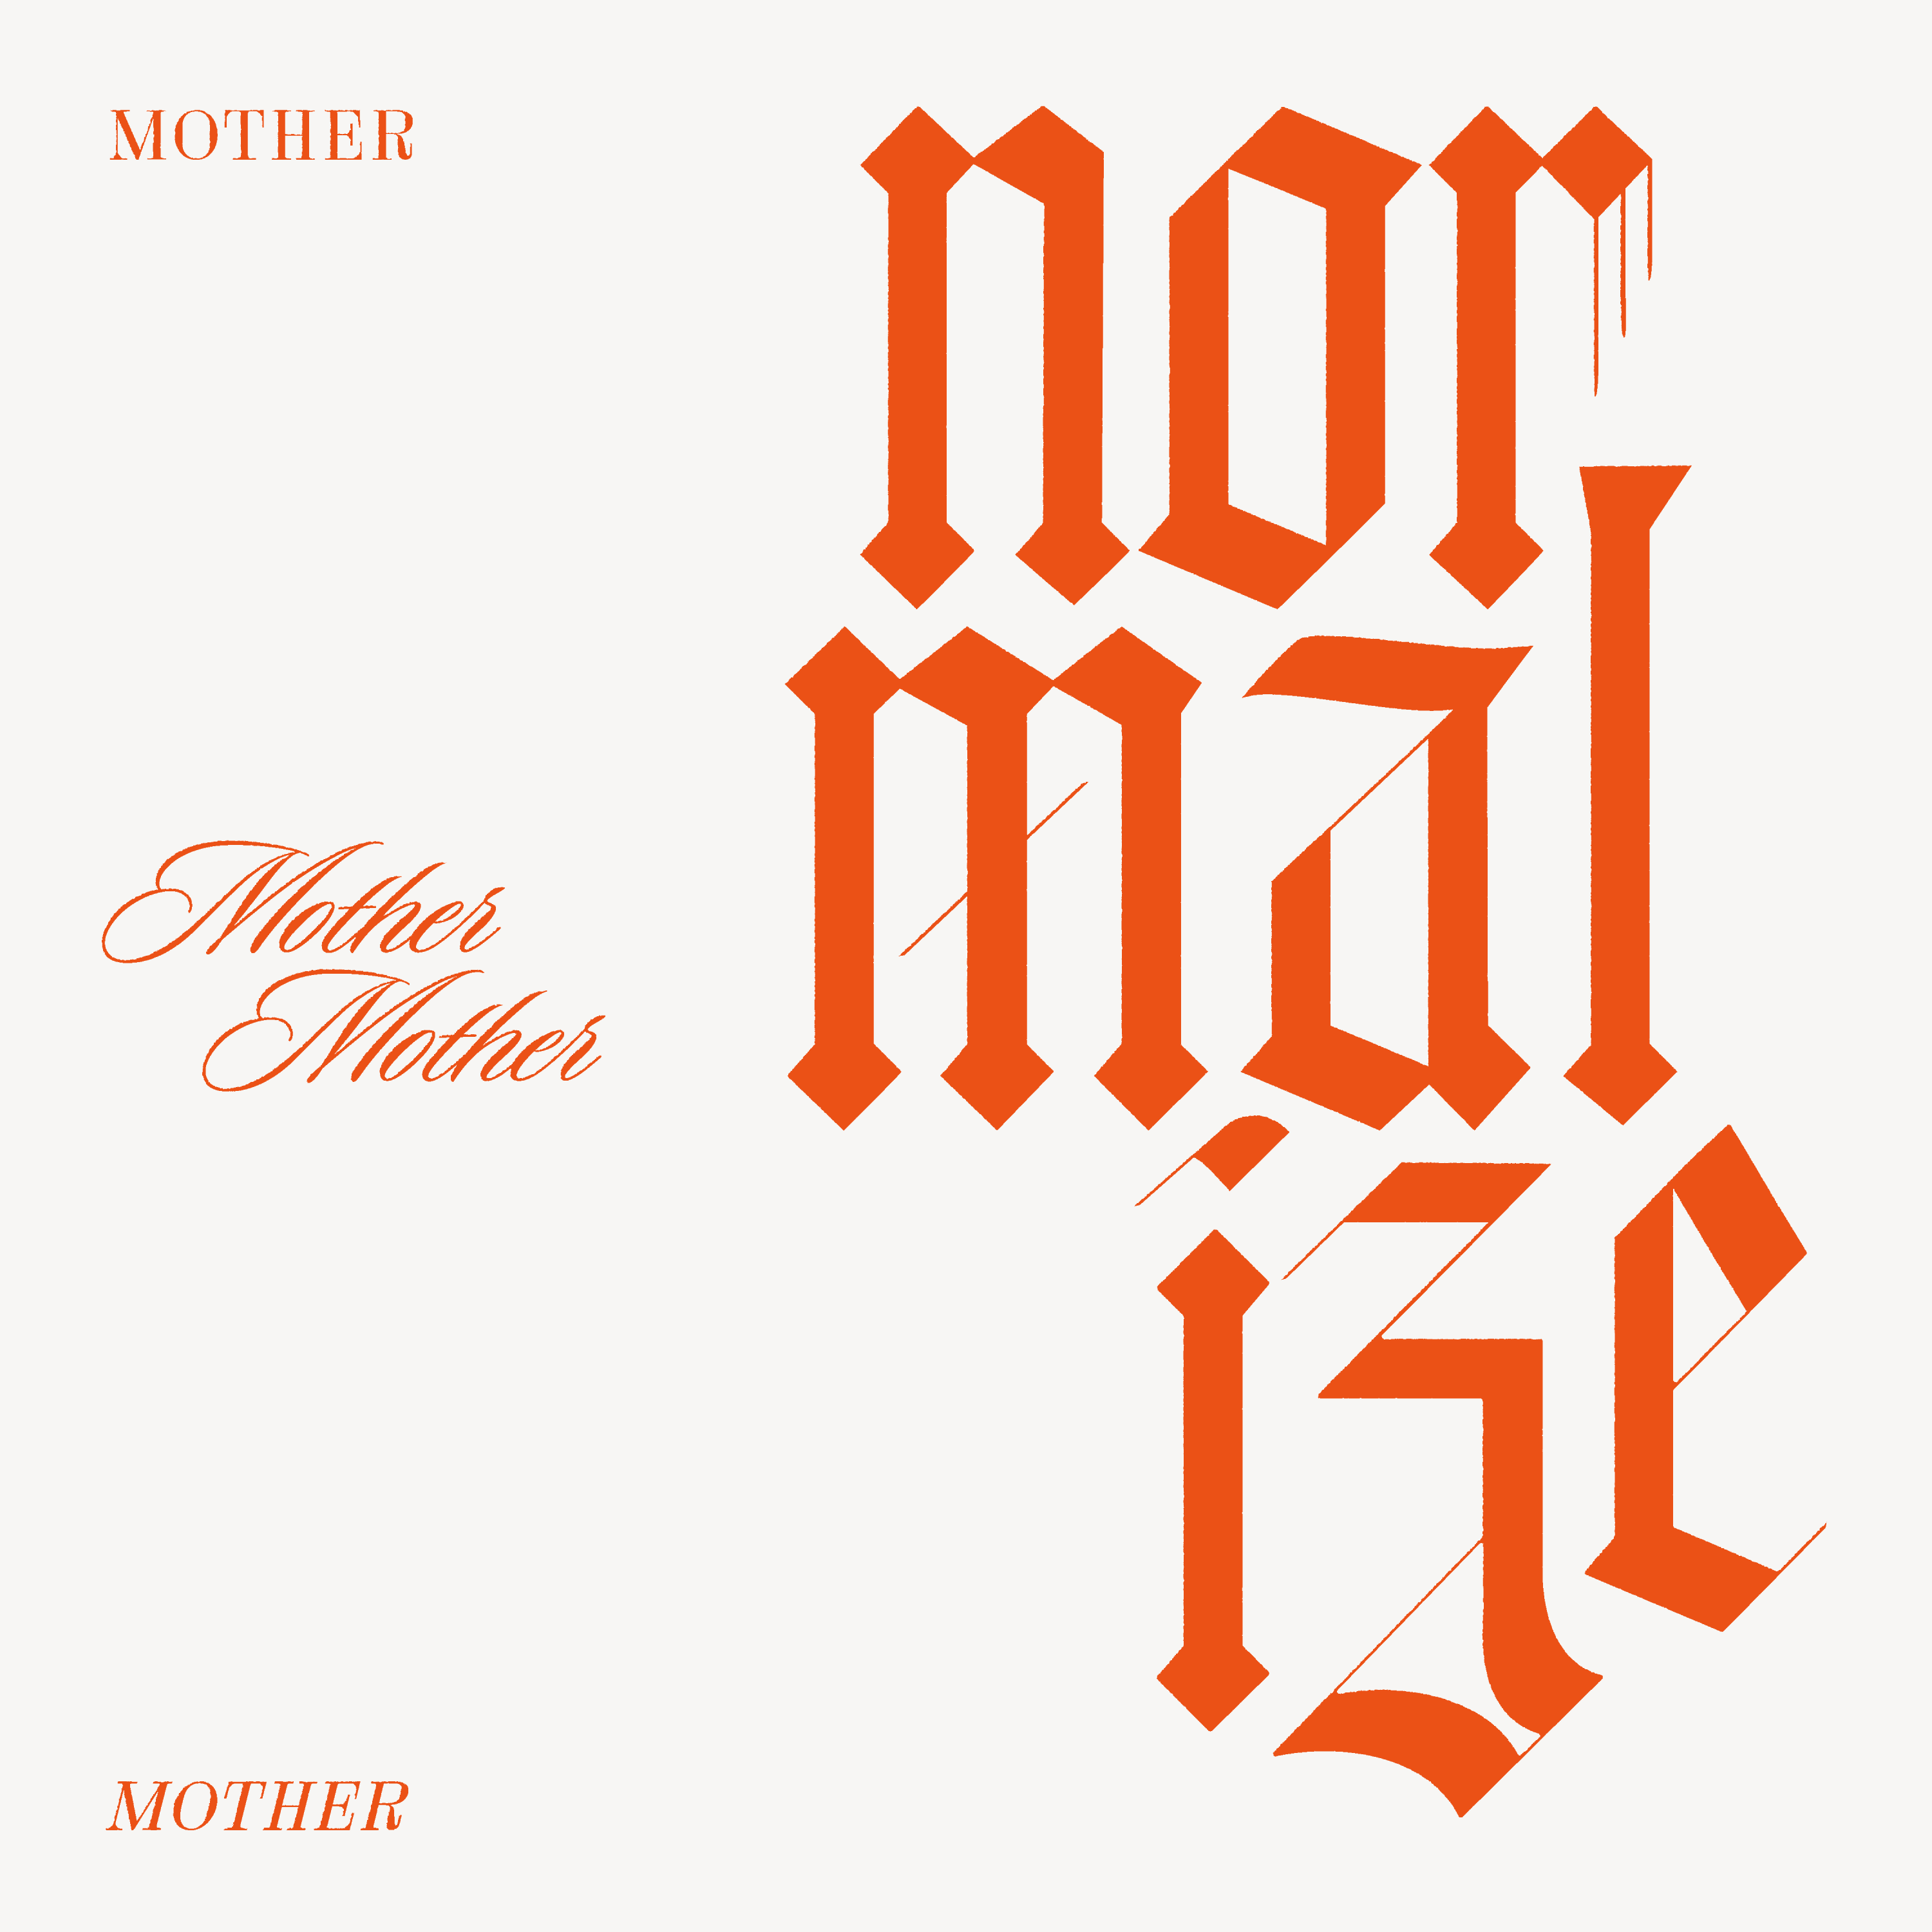 It's the JDI Motherlode on tour with Mother Mother - Radial